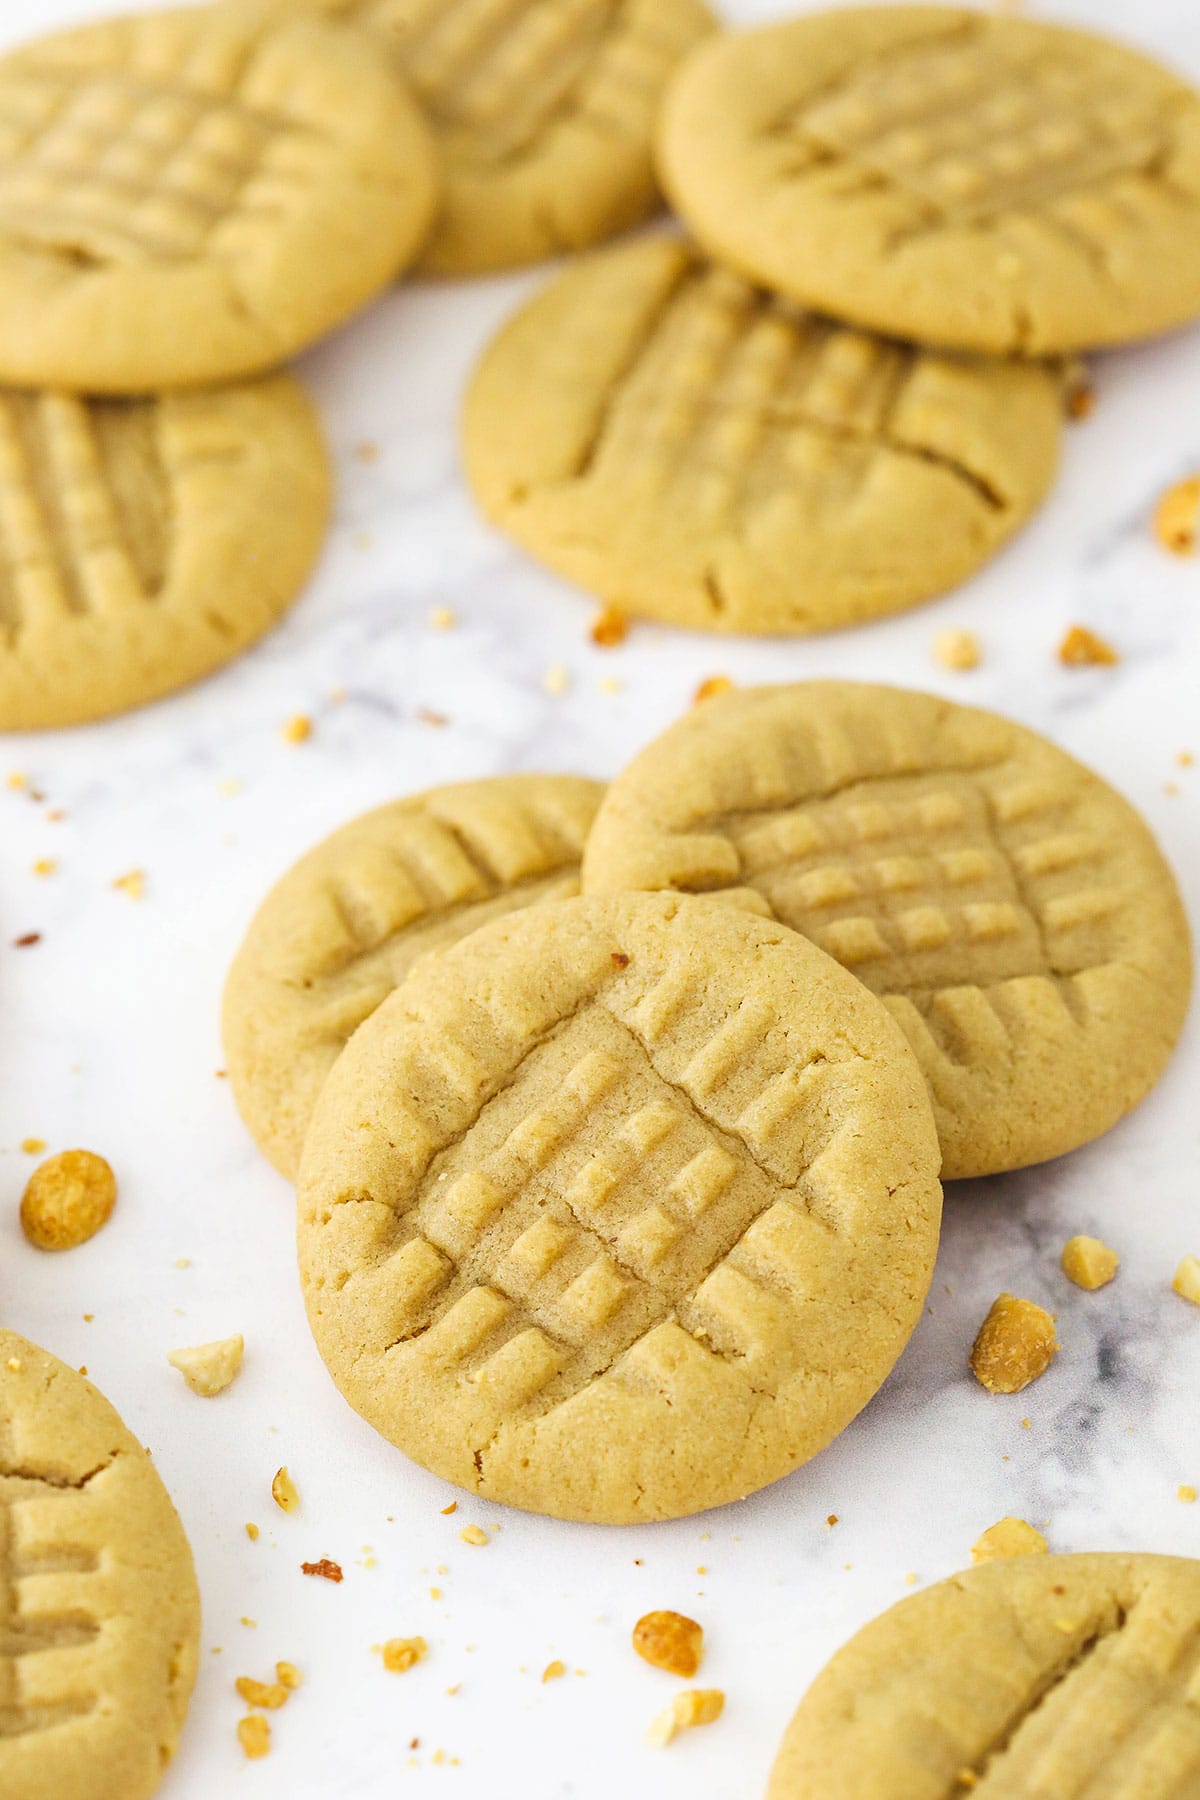 A group of three peanut butter cookies on a marble countertop with more cookies surrounding them